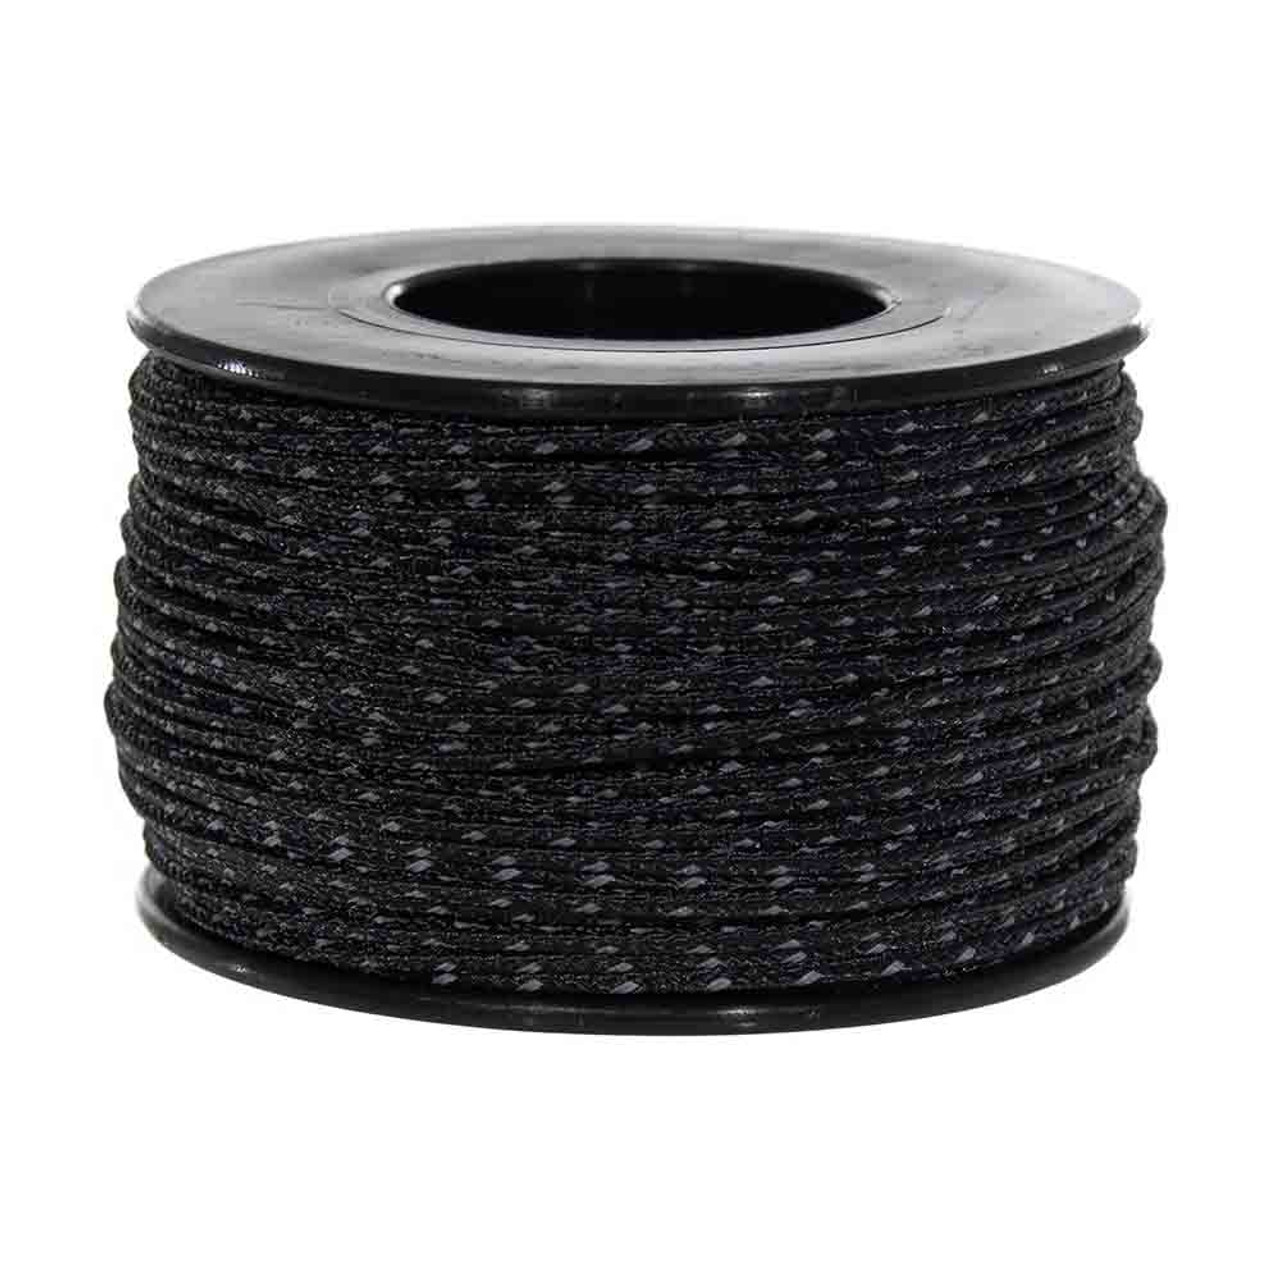 Black Micro Cord with Reflective Tracers - 125 Feet